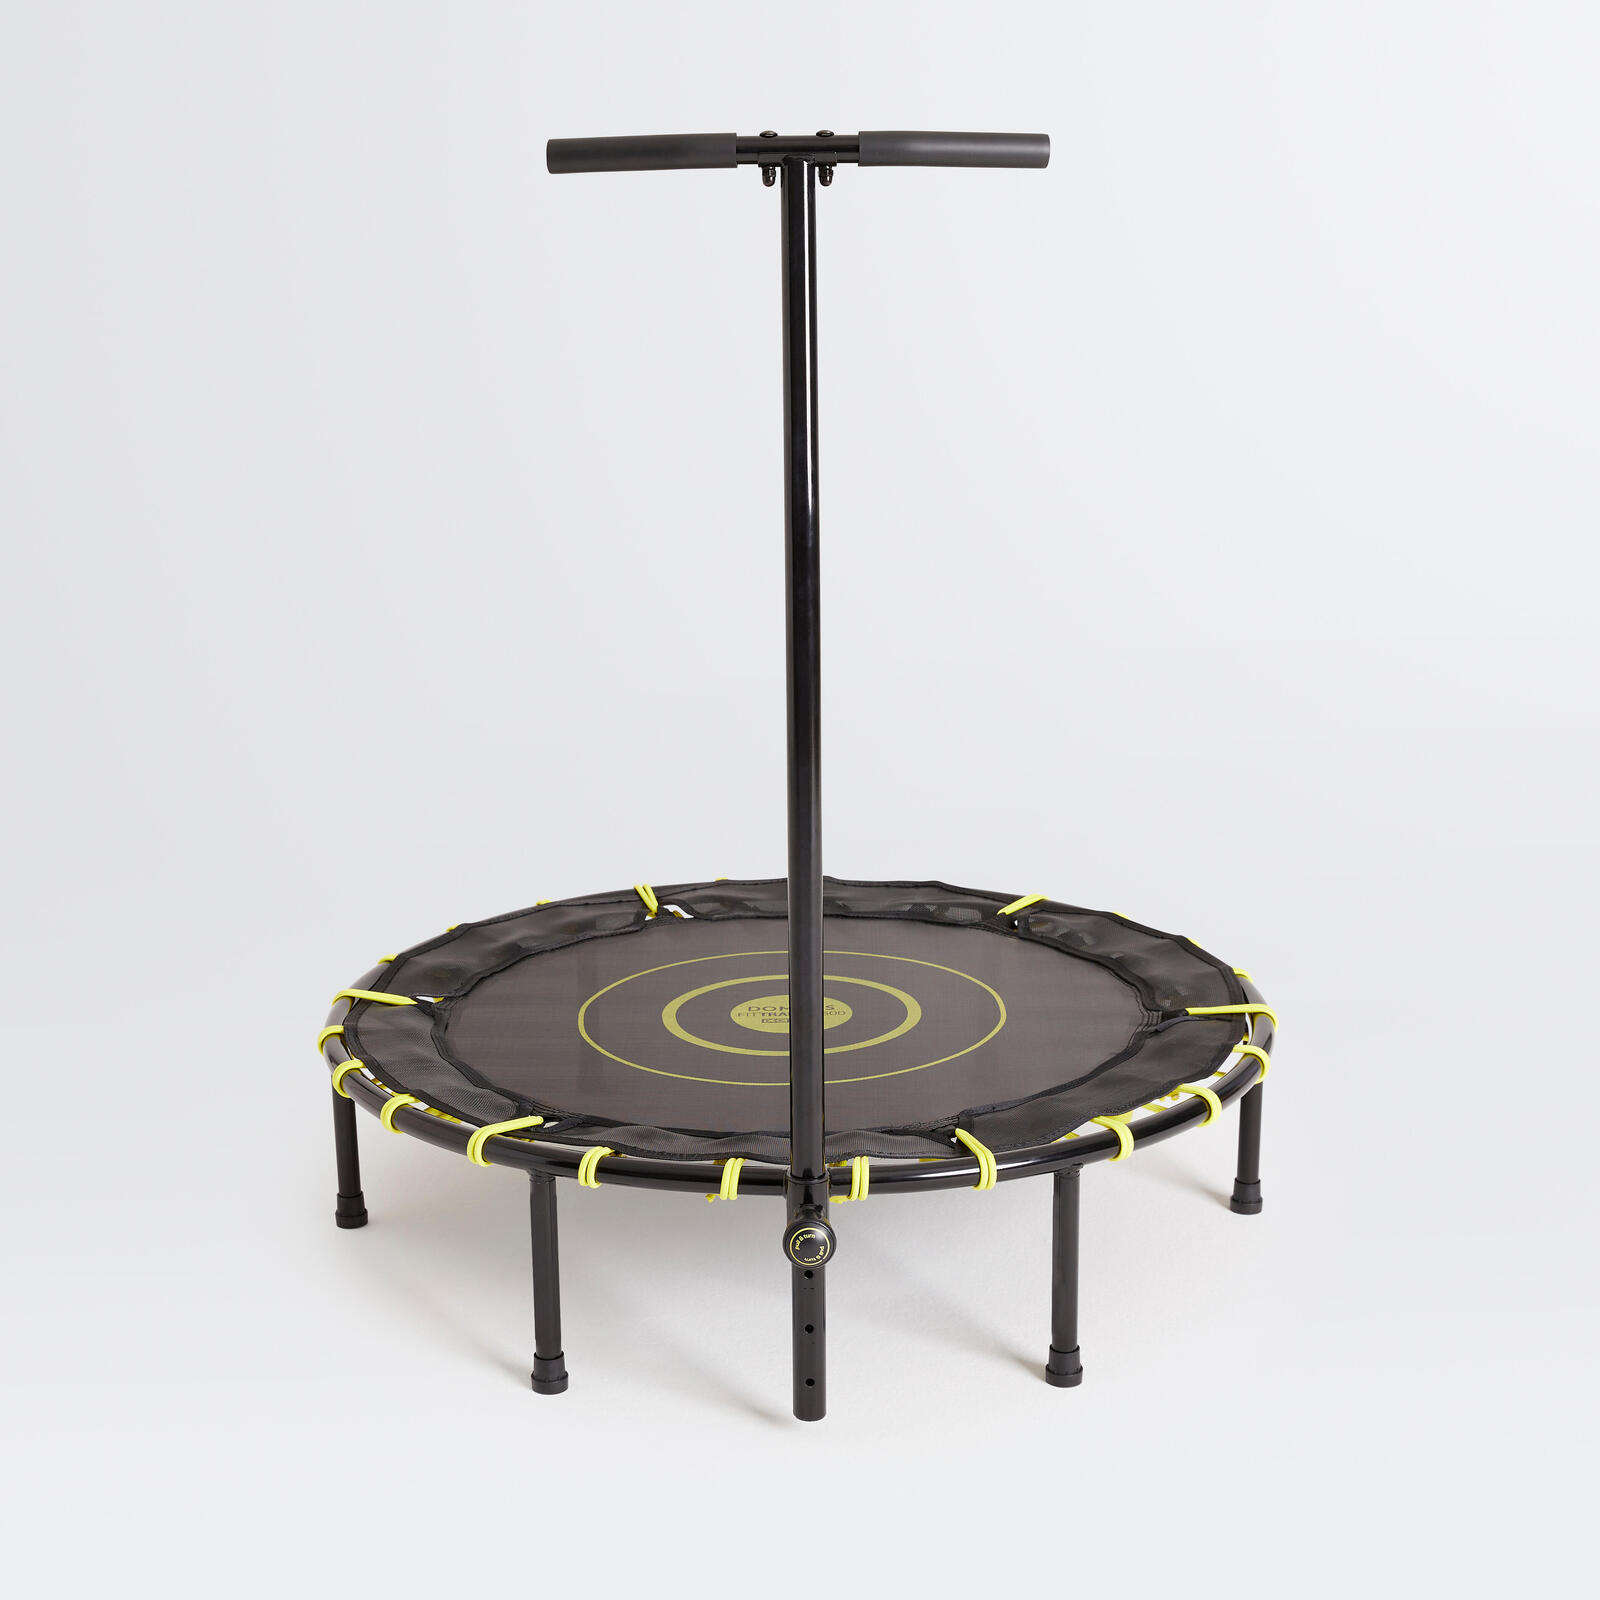 Fitness trampoline fit trampo 500 with front bar